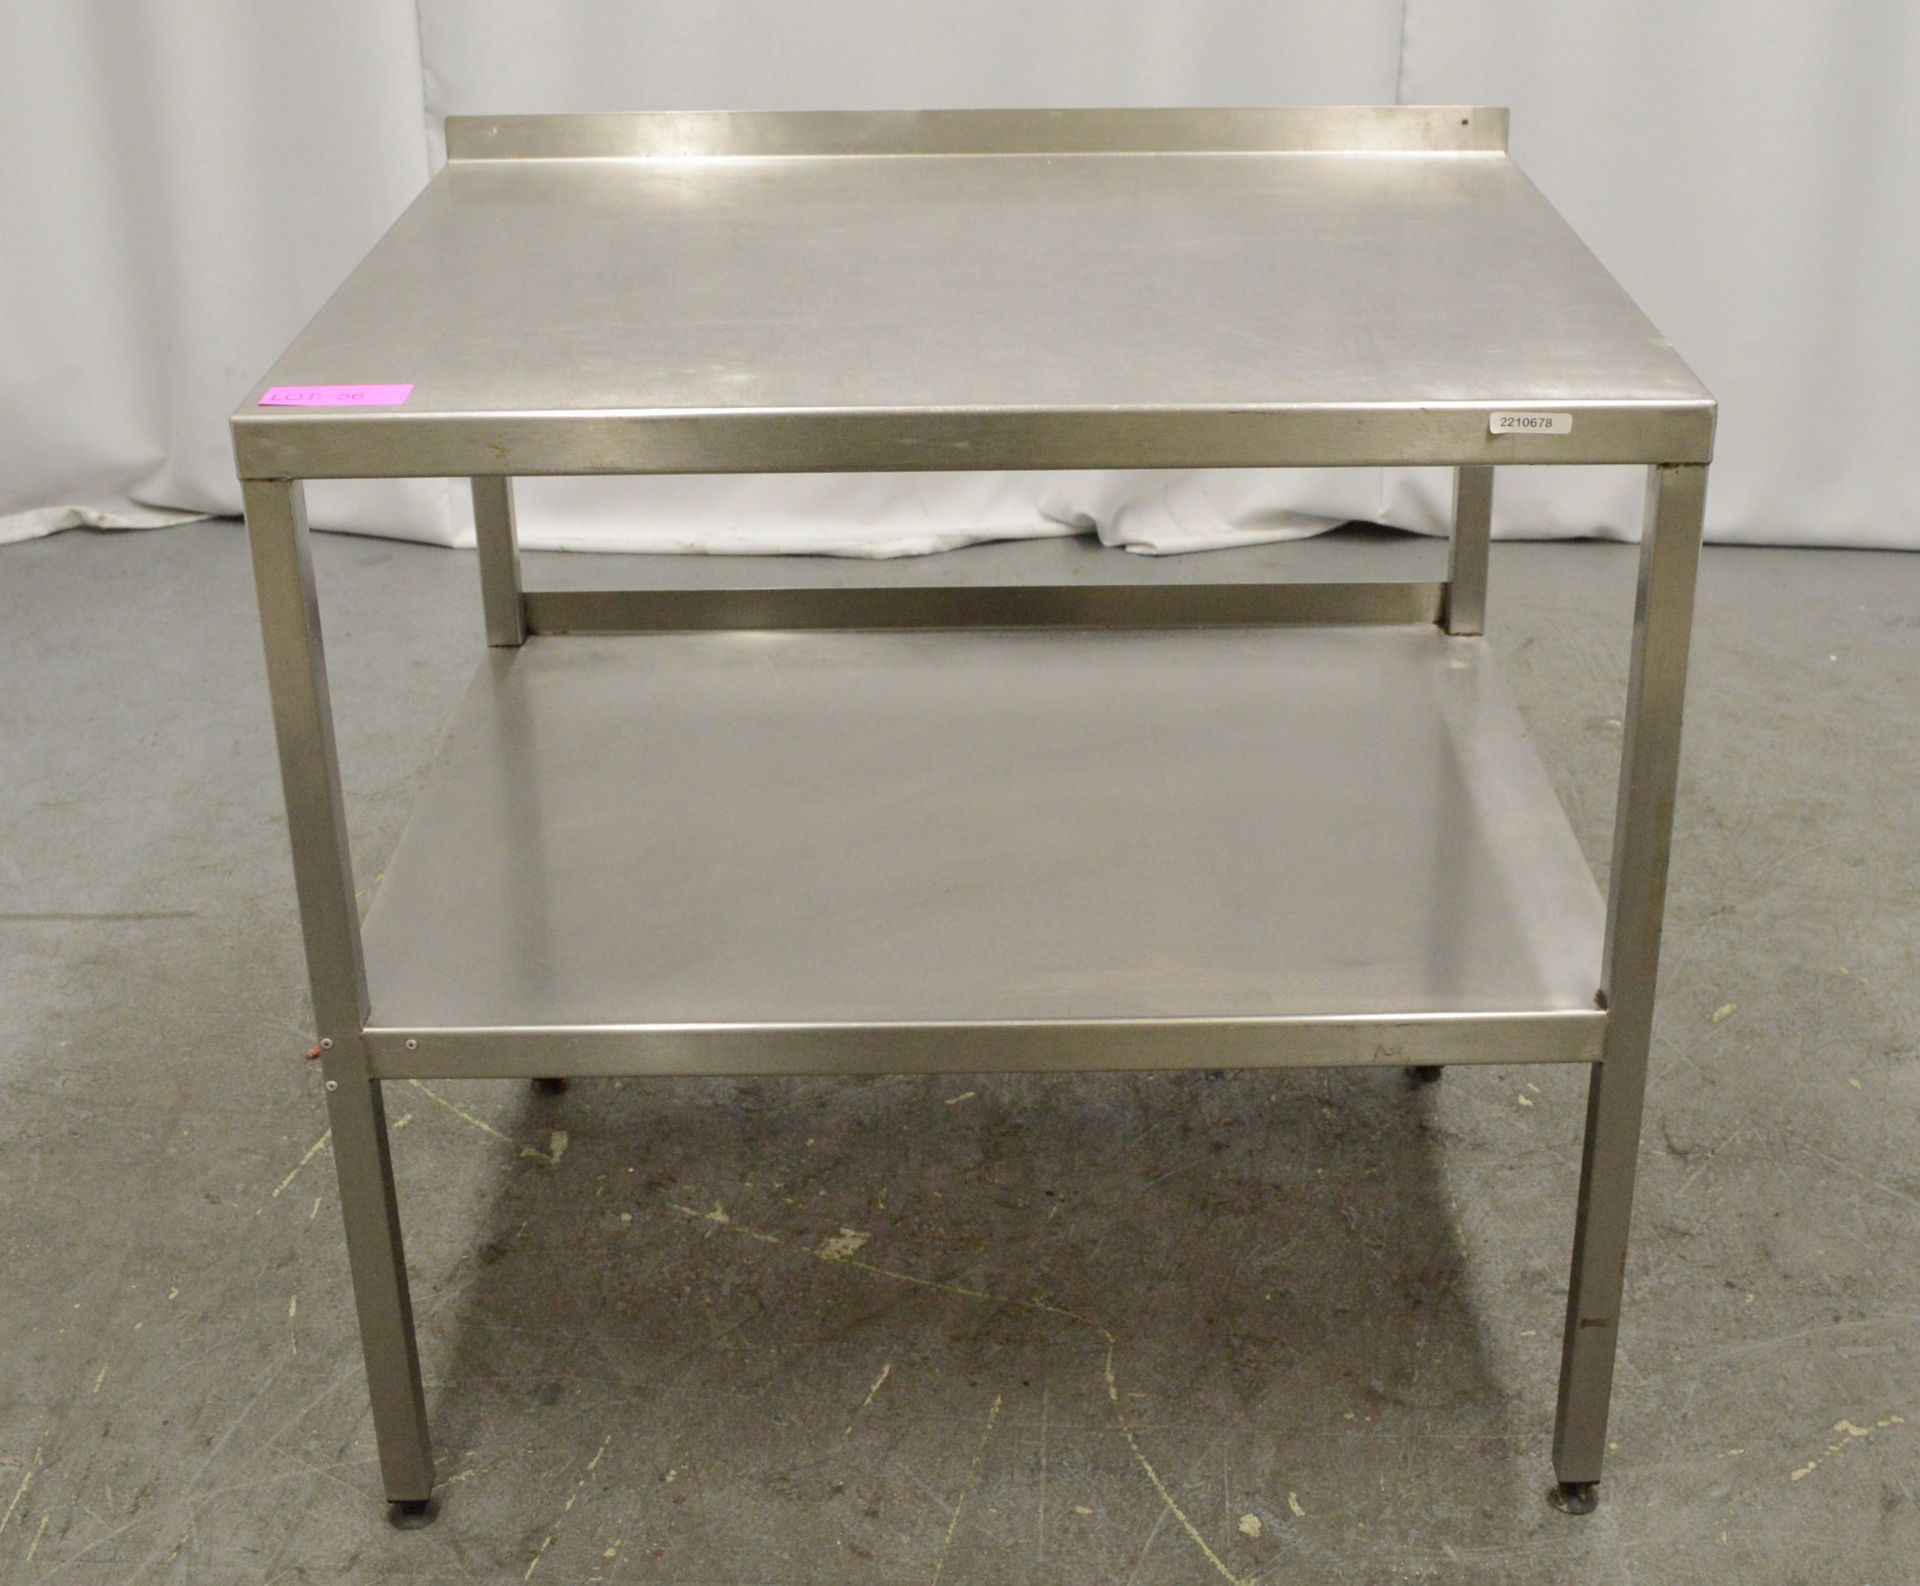 Preparation table 900mm W x 700mm D x 870mm H